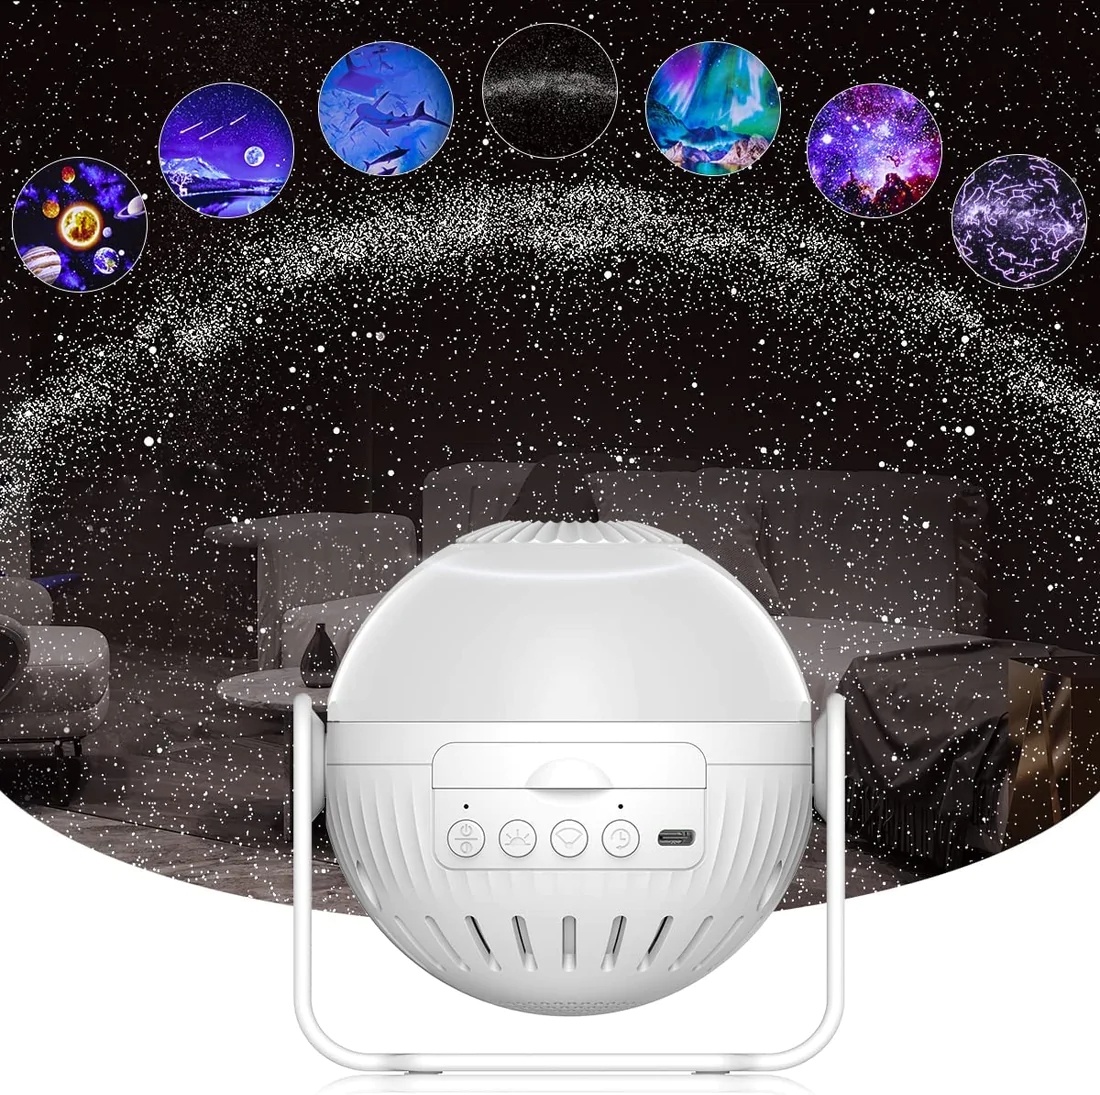 Night Light Projector-7 in 1 Planetarium Projector 360° Adjustable with Planets Nebulae Moon